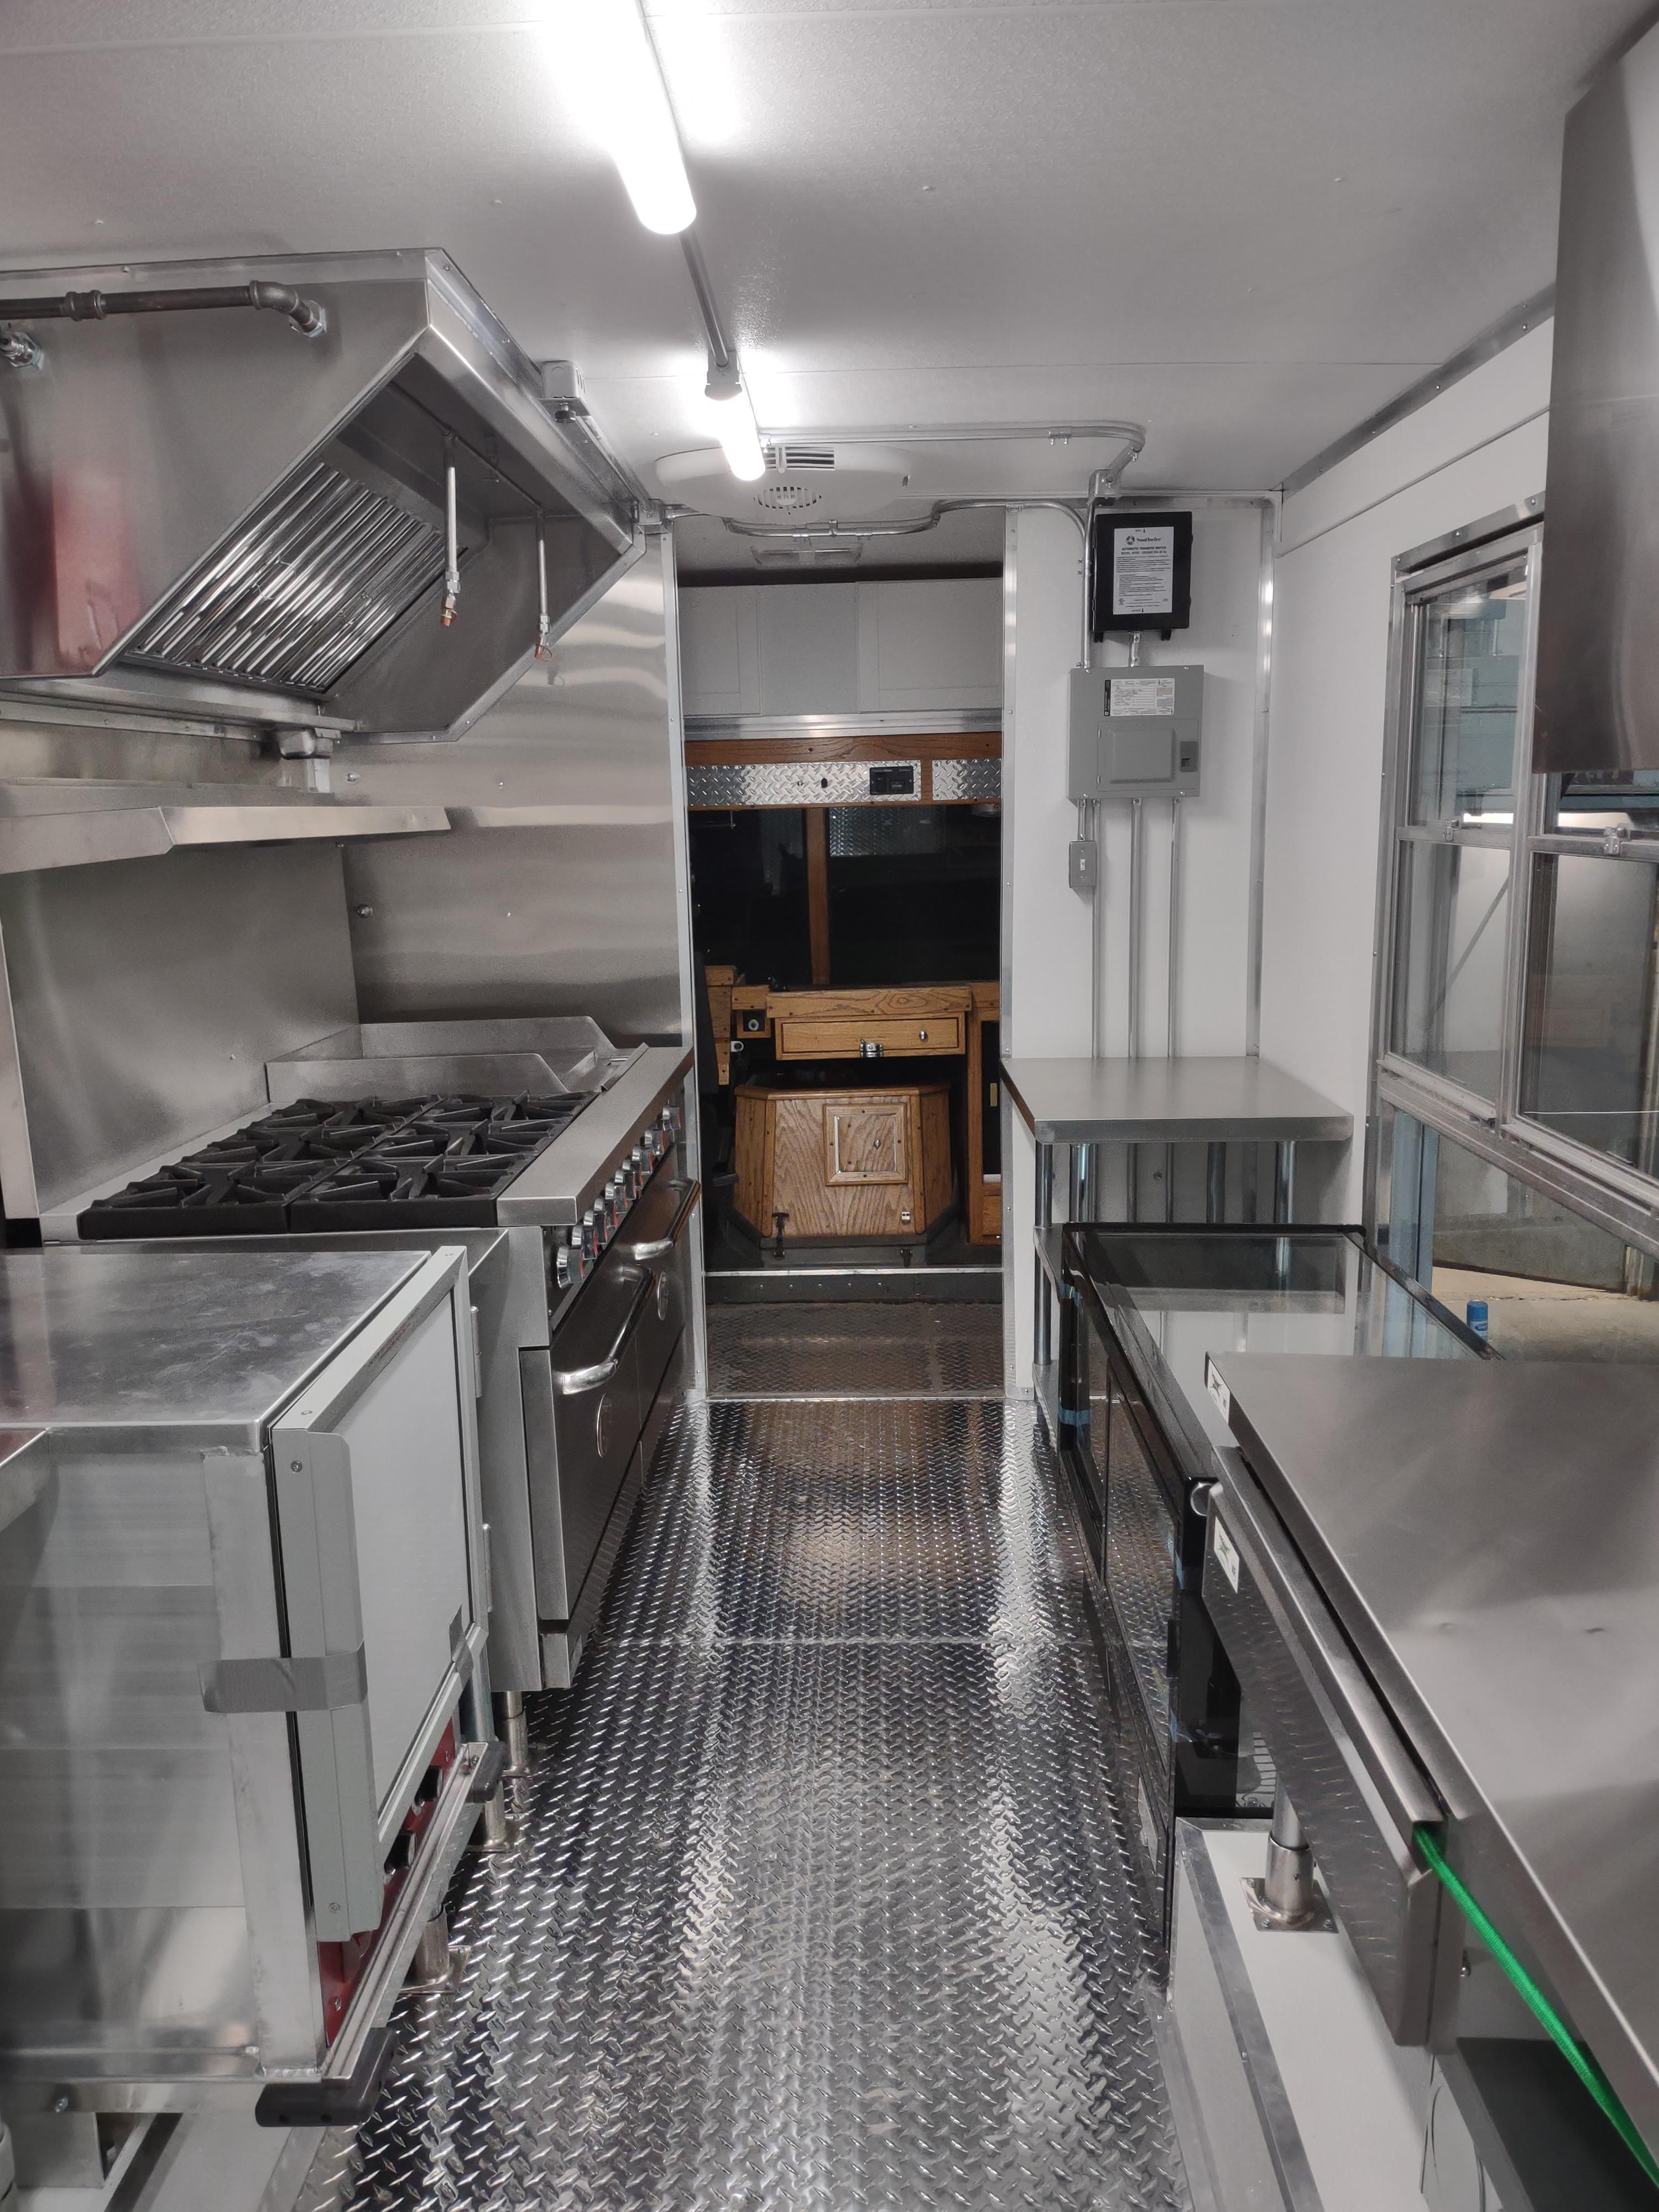 At Mobile Kitchen Fabrication in Denver, CO, we understand the importance of a captivating Food Truck Design. Our design experts collaborate closely with you to create a visually appealing and functional food truck that represents your brand and attracts customers.